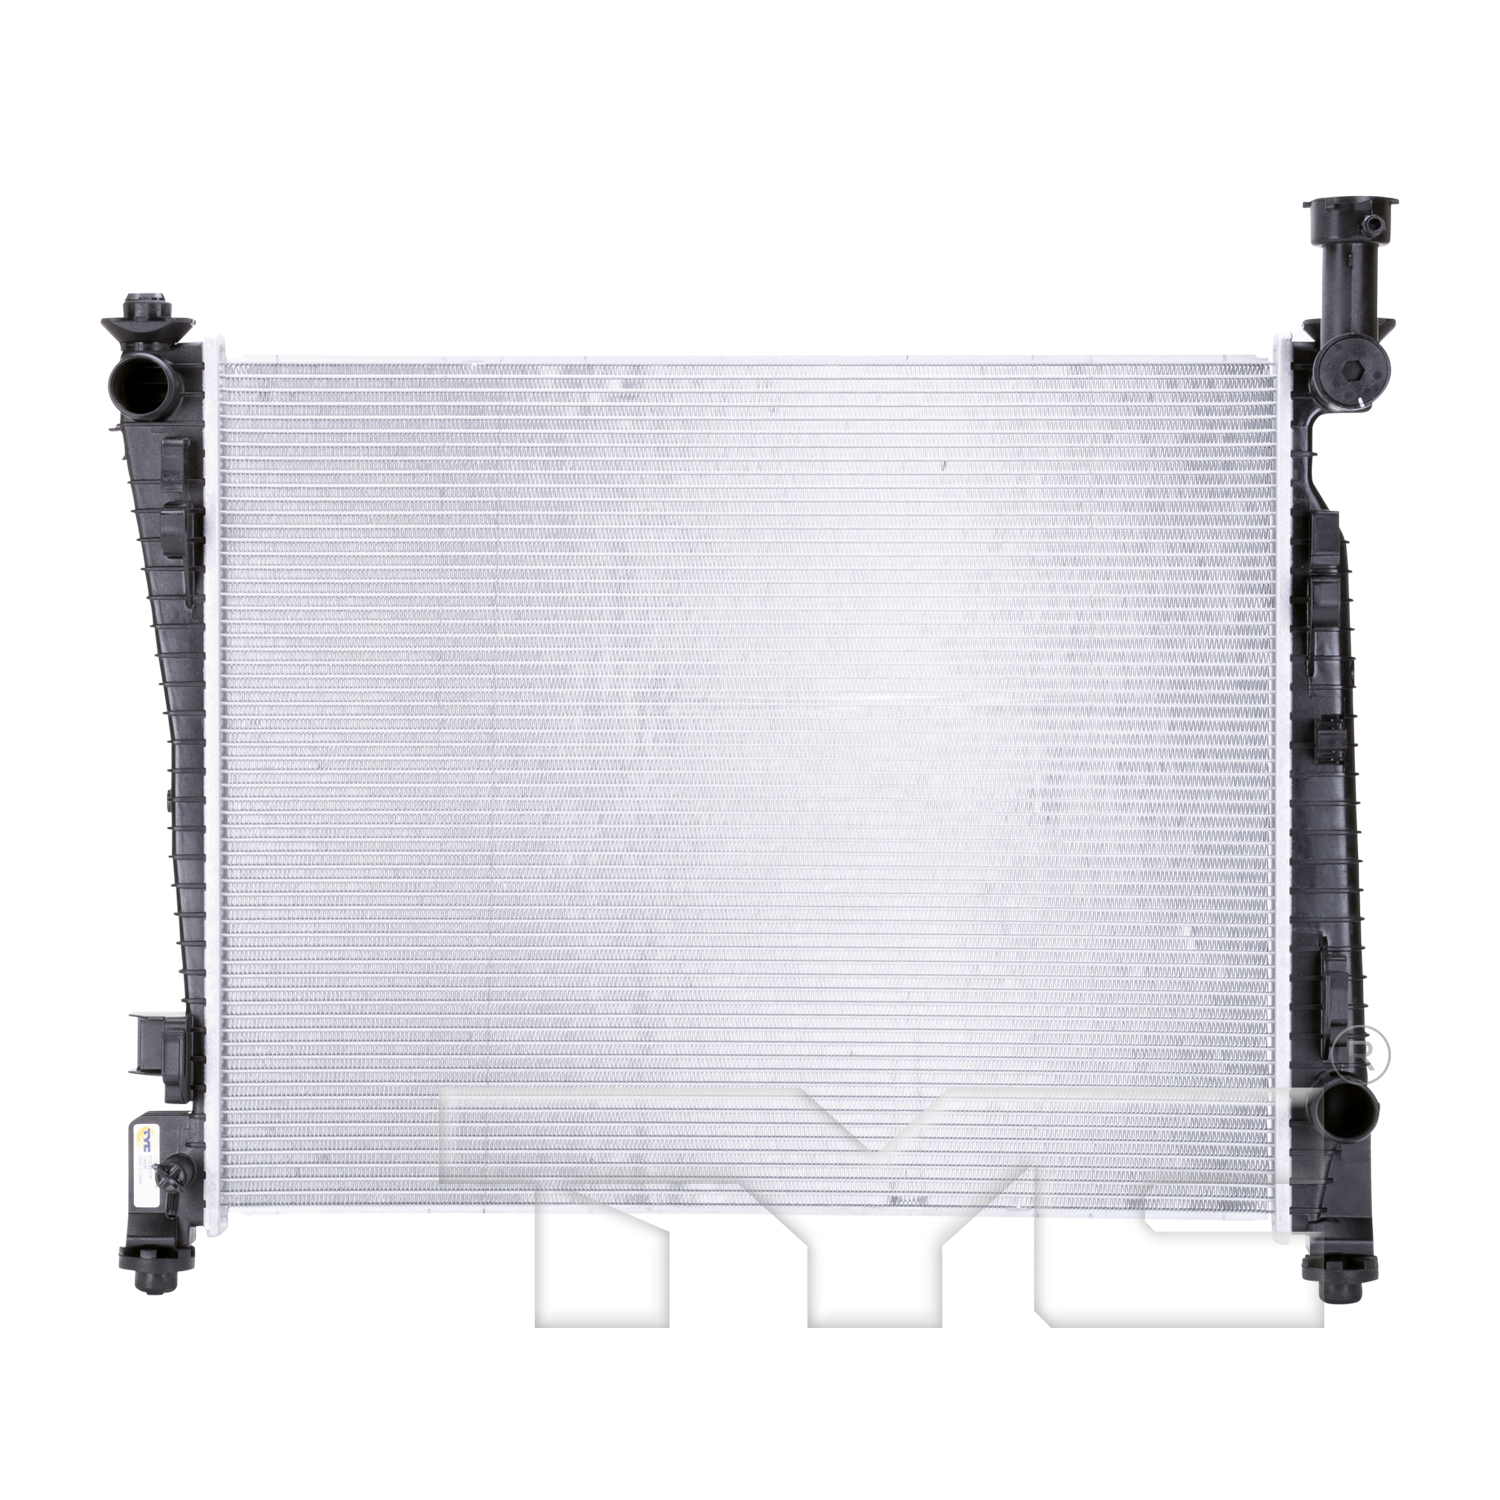 Aftermarket RADIATORS for JEEP - GRAND CHEROKEE, GRAND CHEROKEE,11-13,Radiator assembly